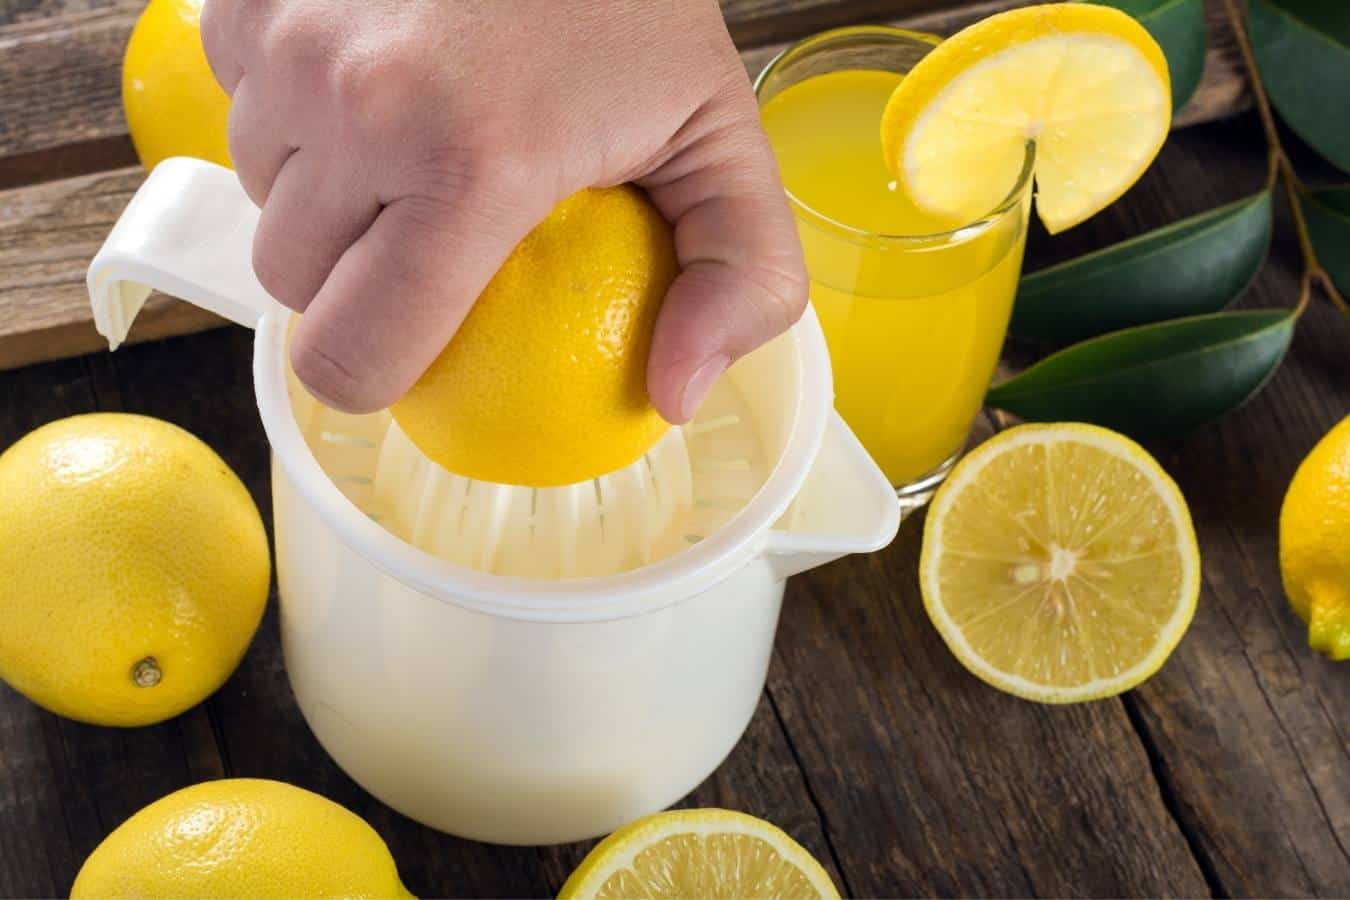 How To Remove Hair Dye With Lemon Juice